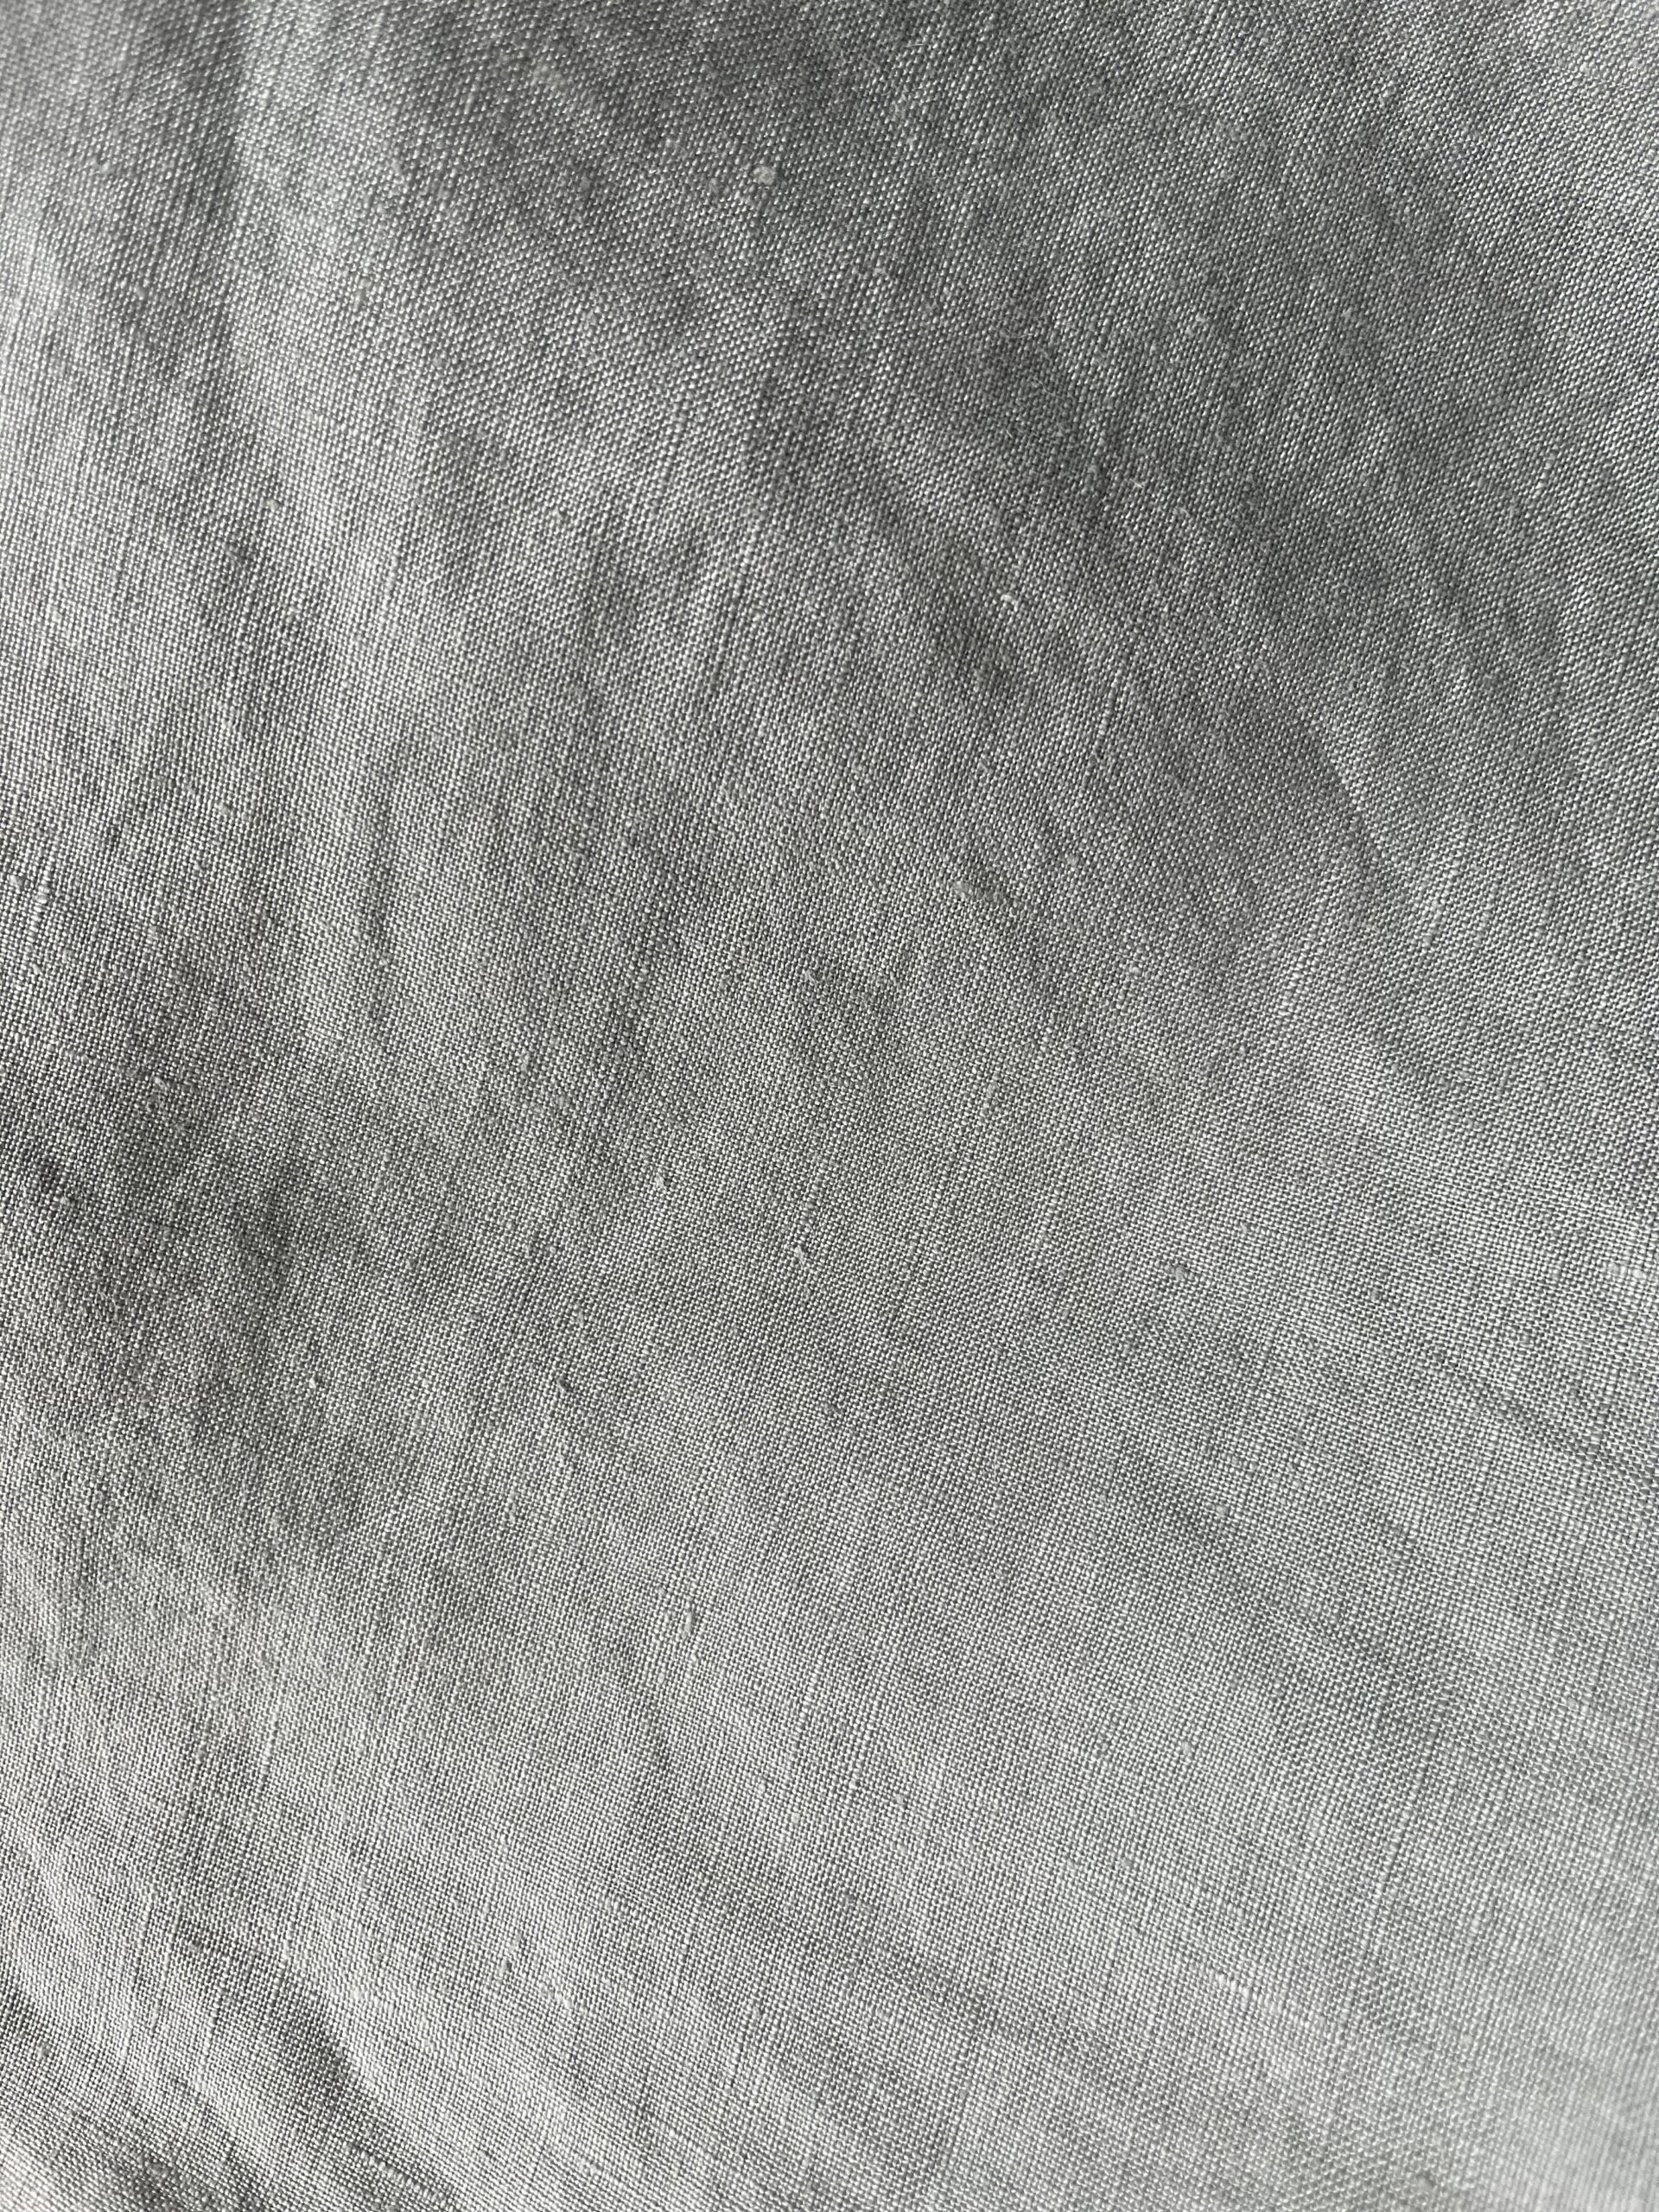 Close-up image of a grey fabric texture with visible weave patterns and slight variations in shading.